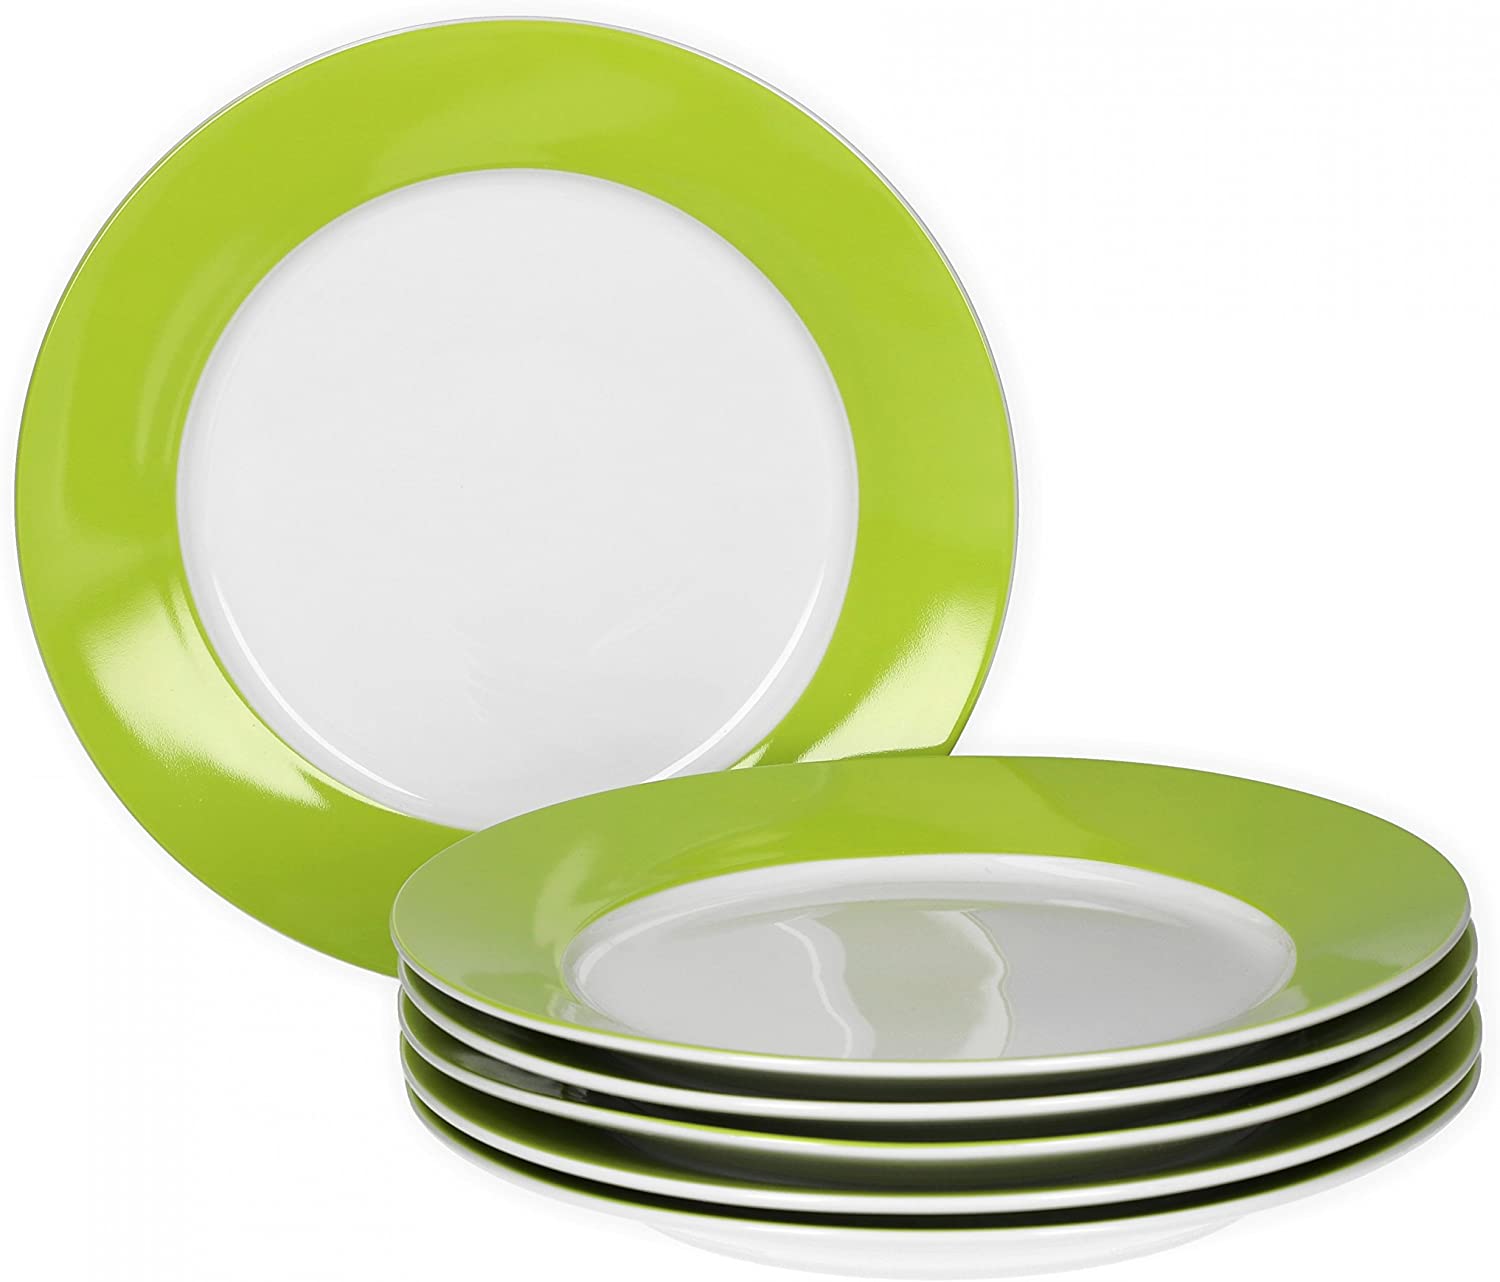 Van Well Vario Breakfast Plate Set 6 Pieces I Plate Service for 6 People I Cake Plate with Diameter 20 cm I Porcelain Set White with Green Rim I Dessert Plate Set Microwave Safe